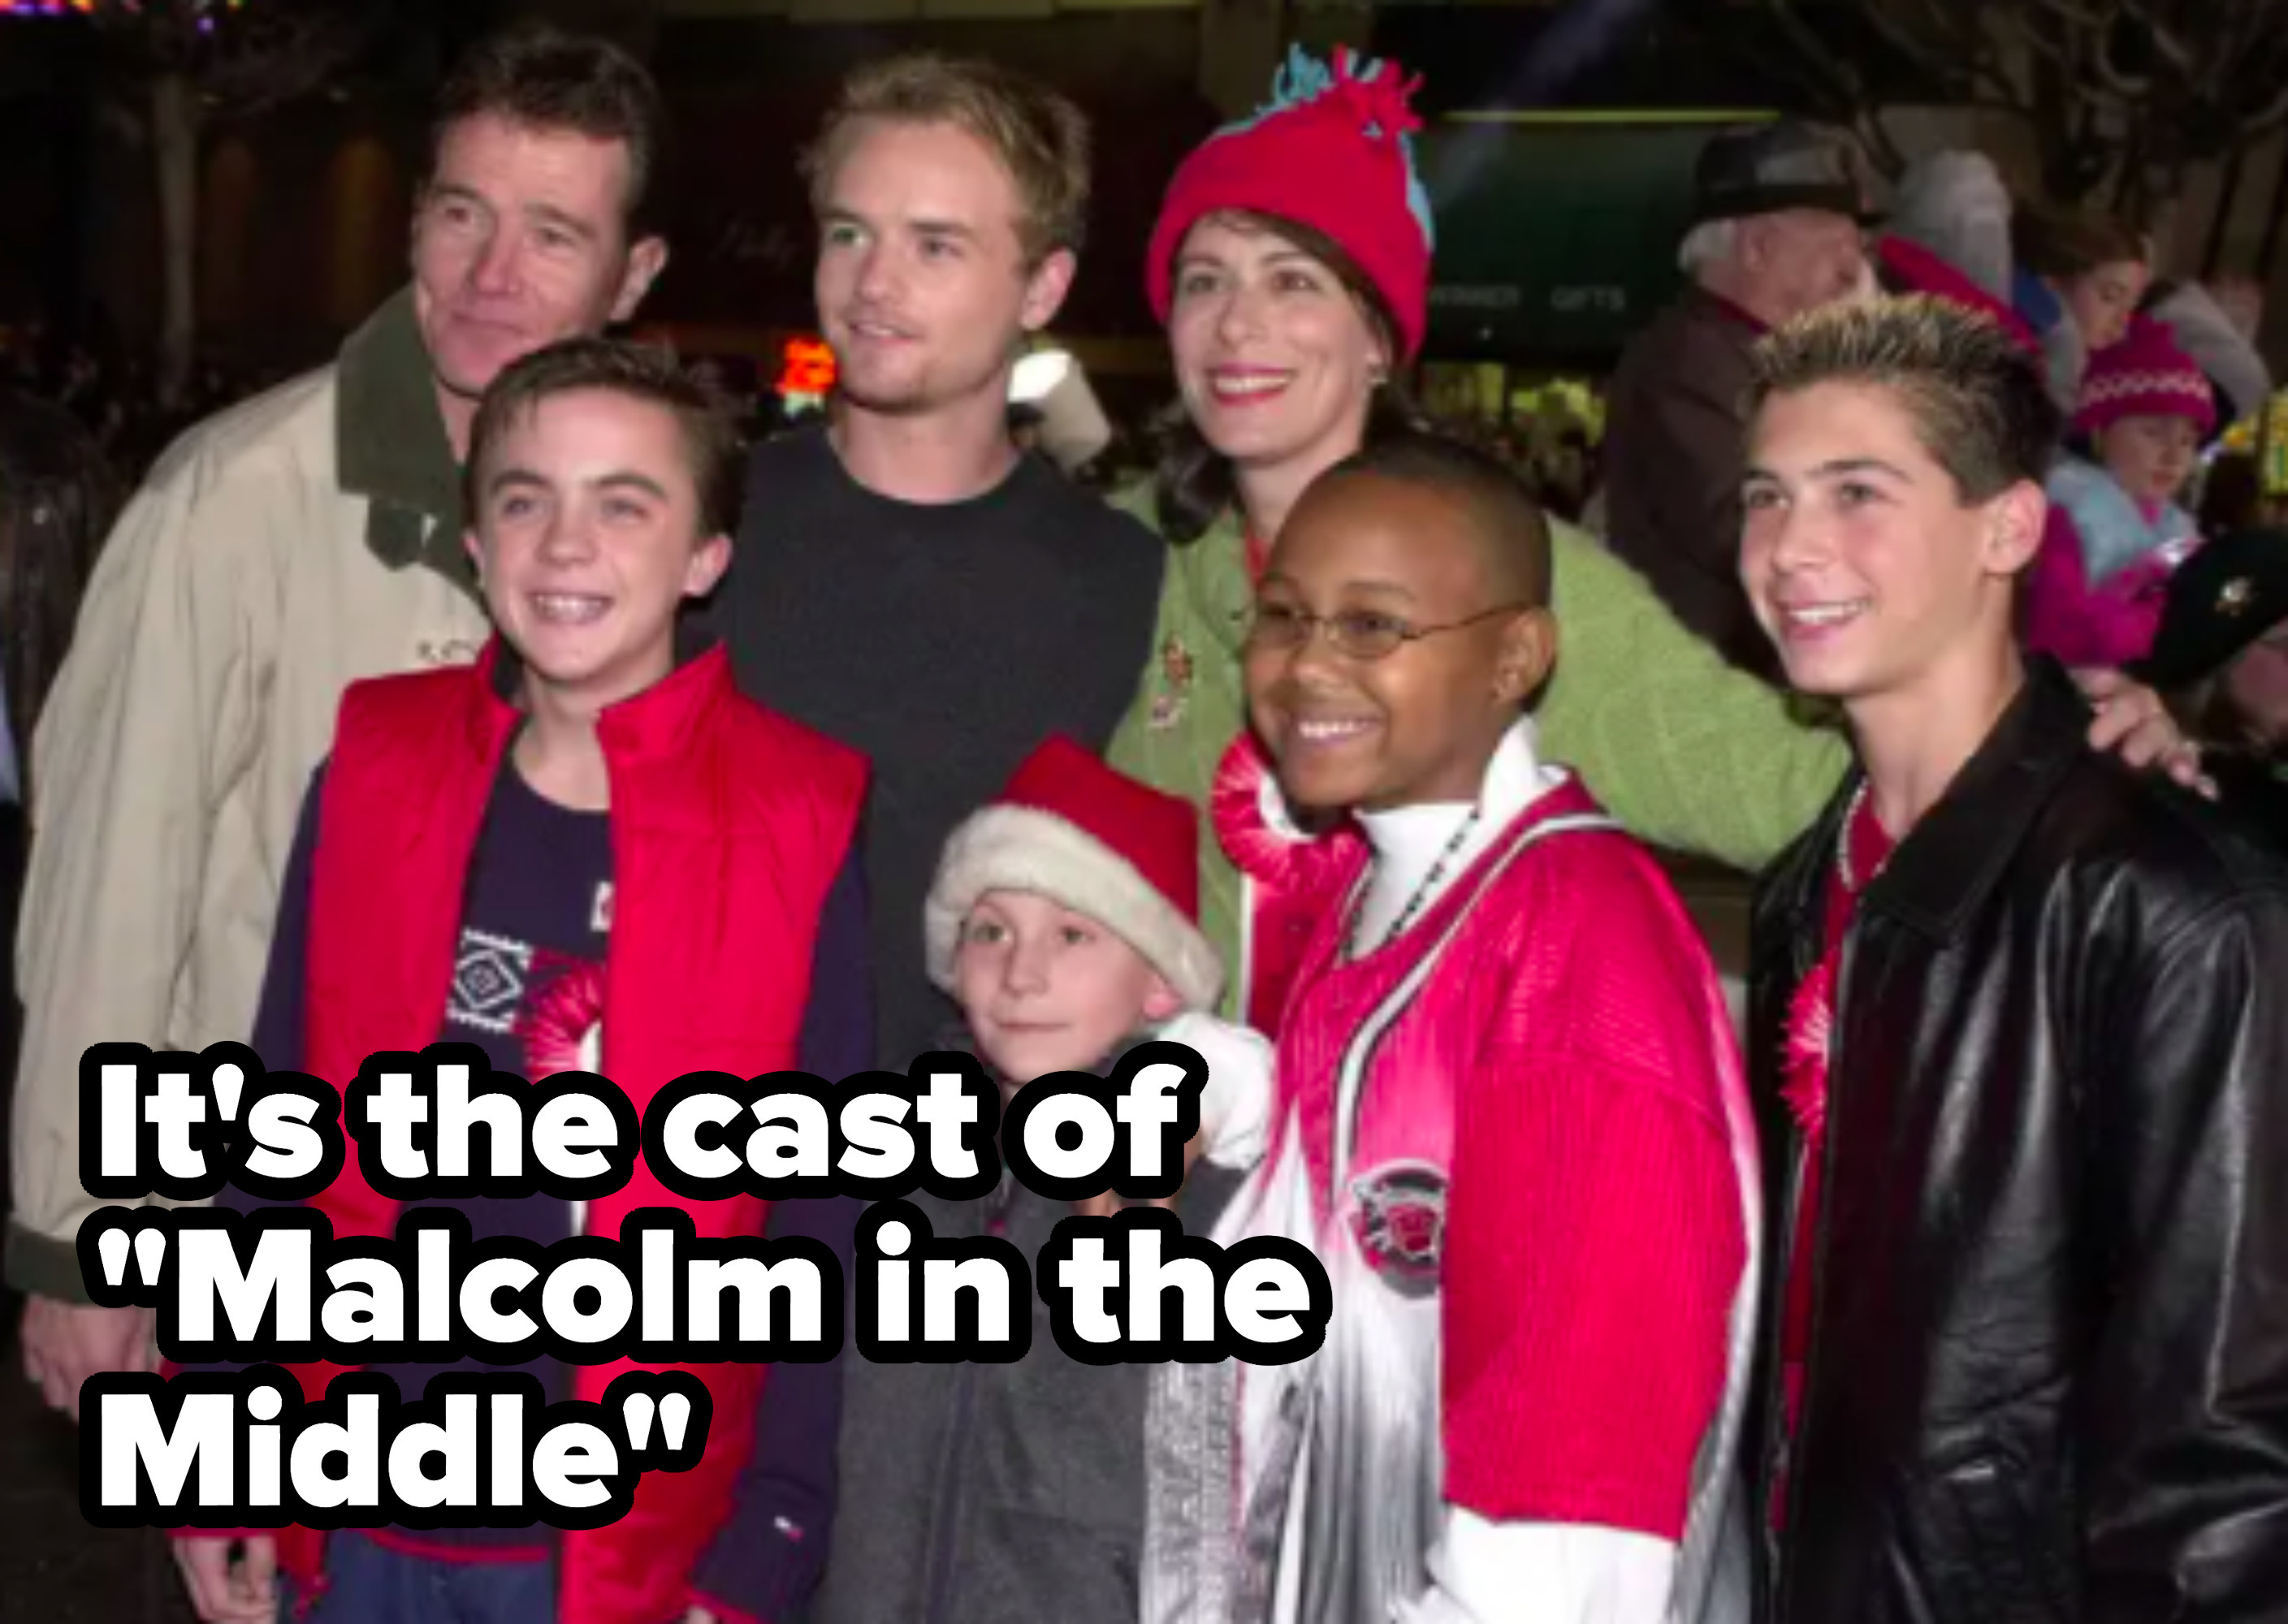 the cast of malcolm at some festive christmas event